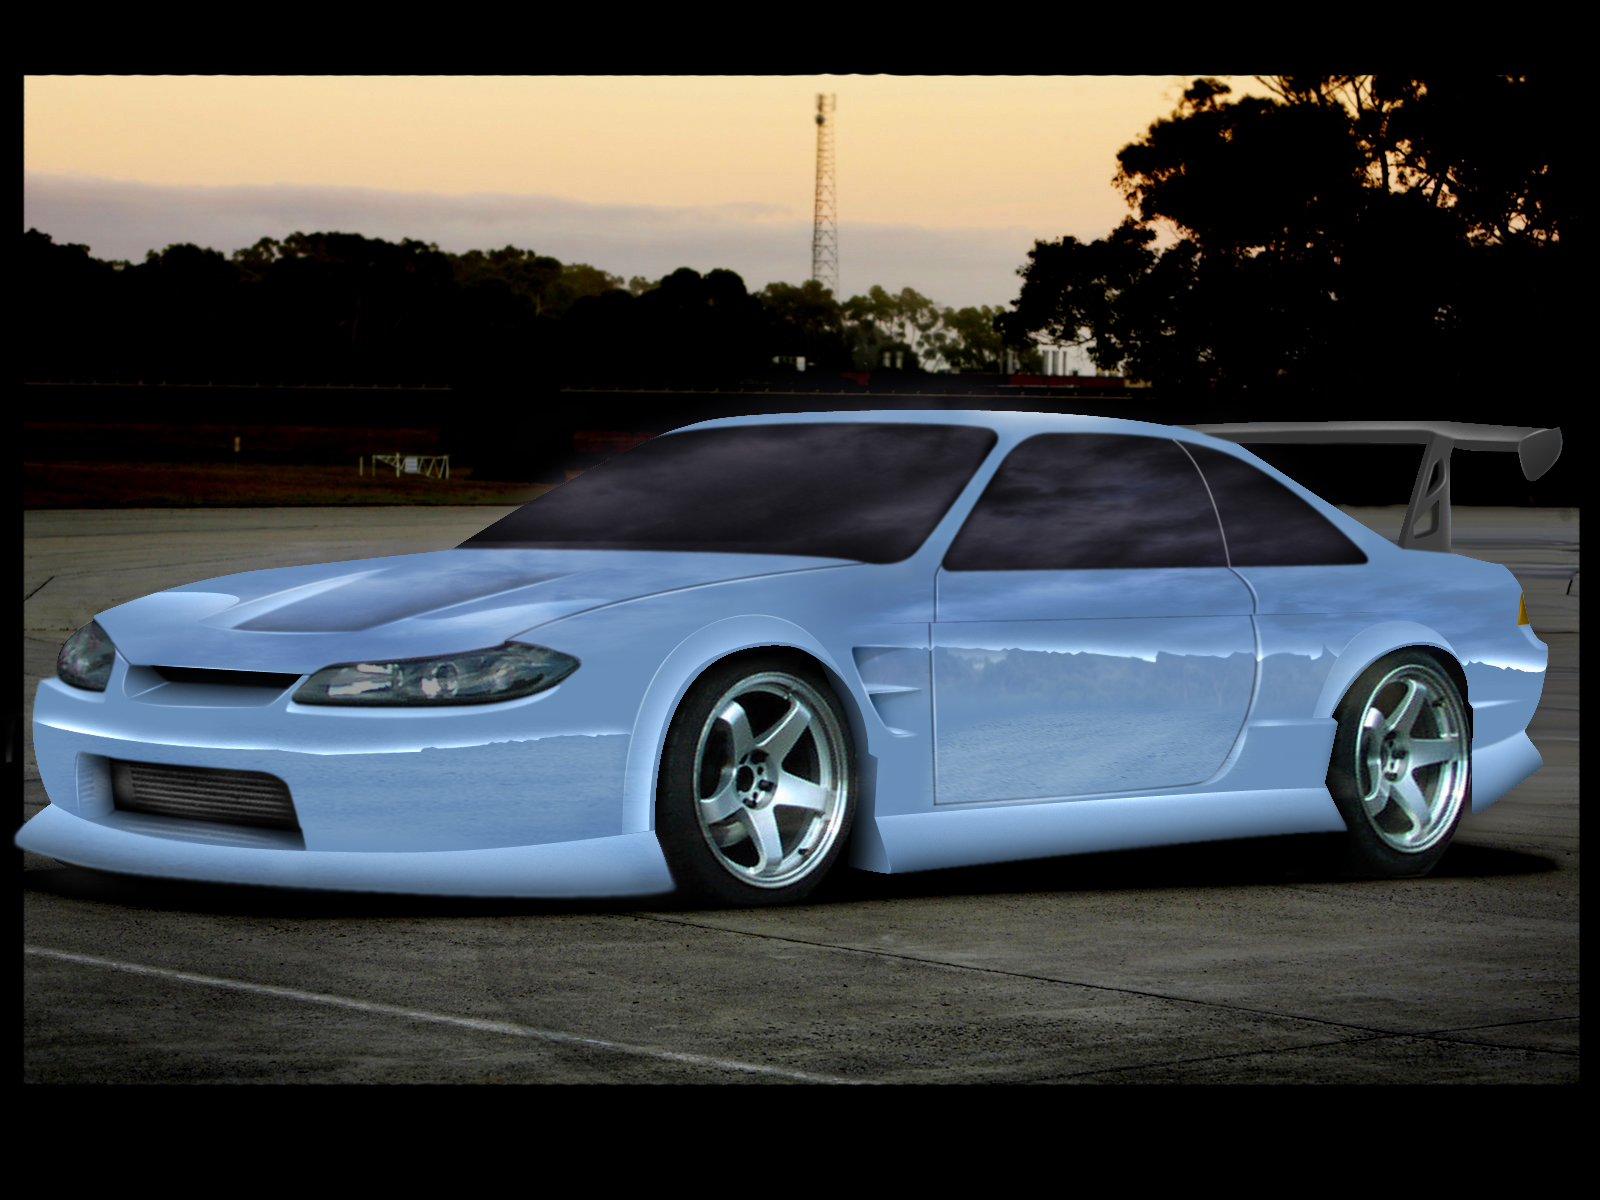 Nissan Silvia S15 Tuning by